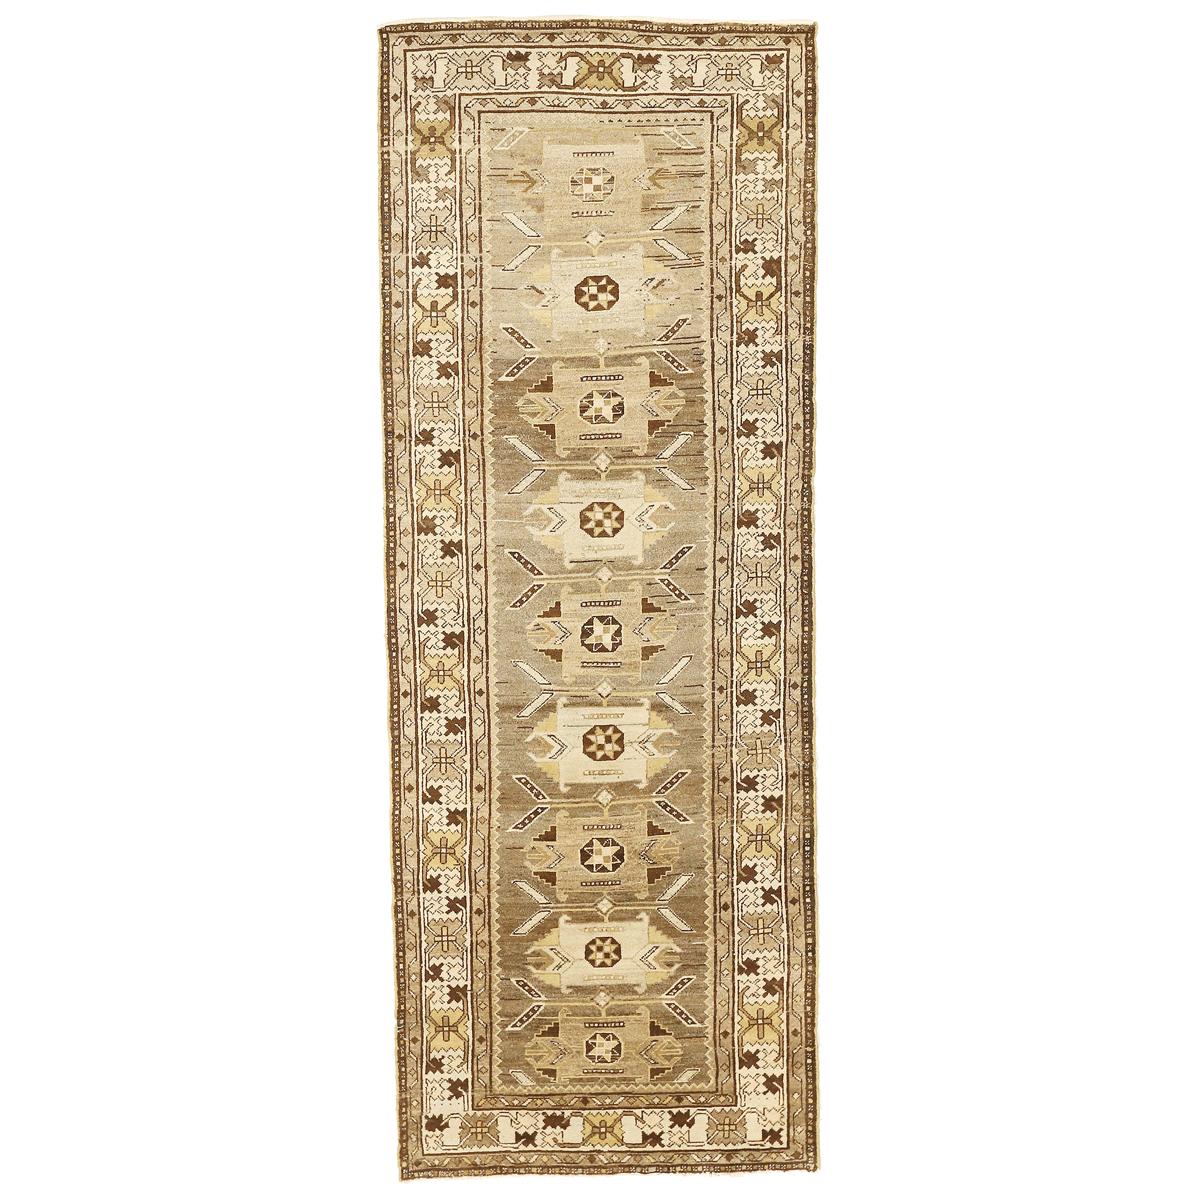 Antique Persian Saveh Runner Rug with Brown and Ivory Geometric Patterns